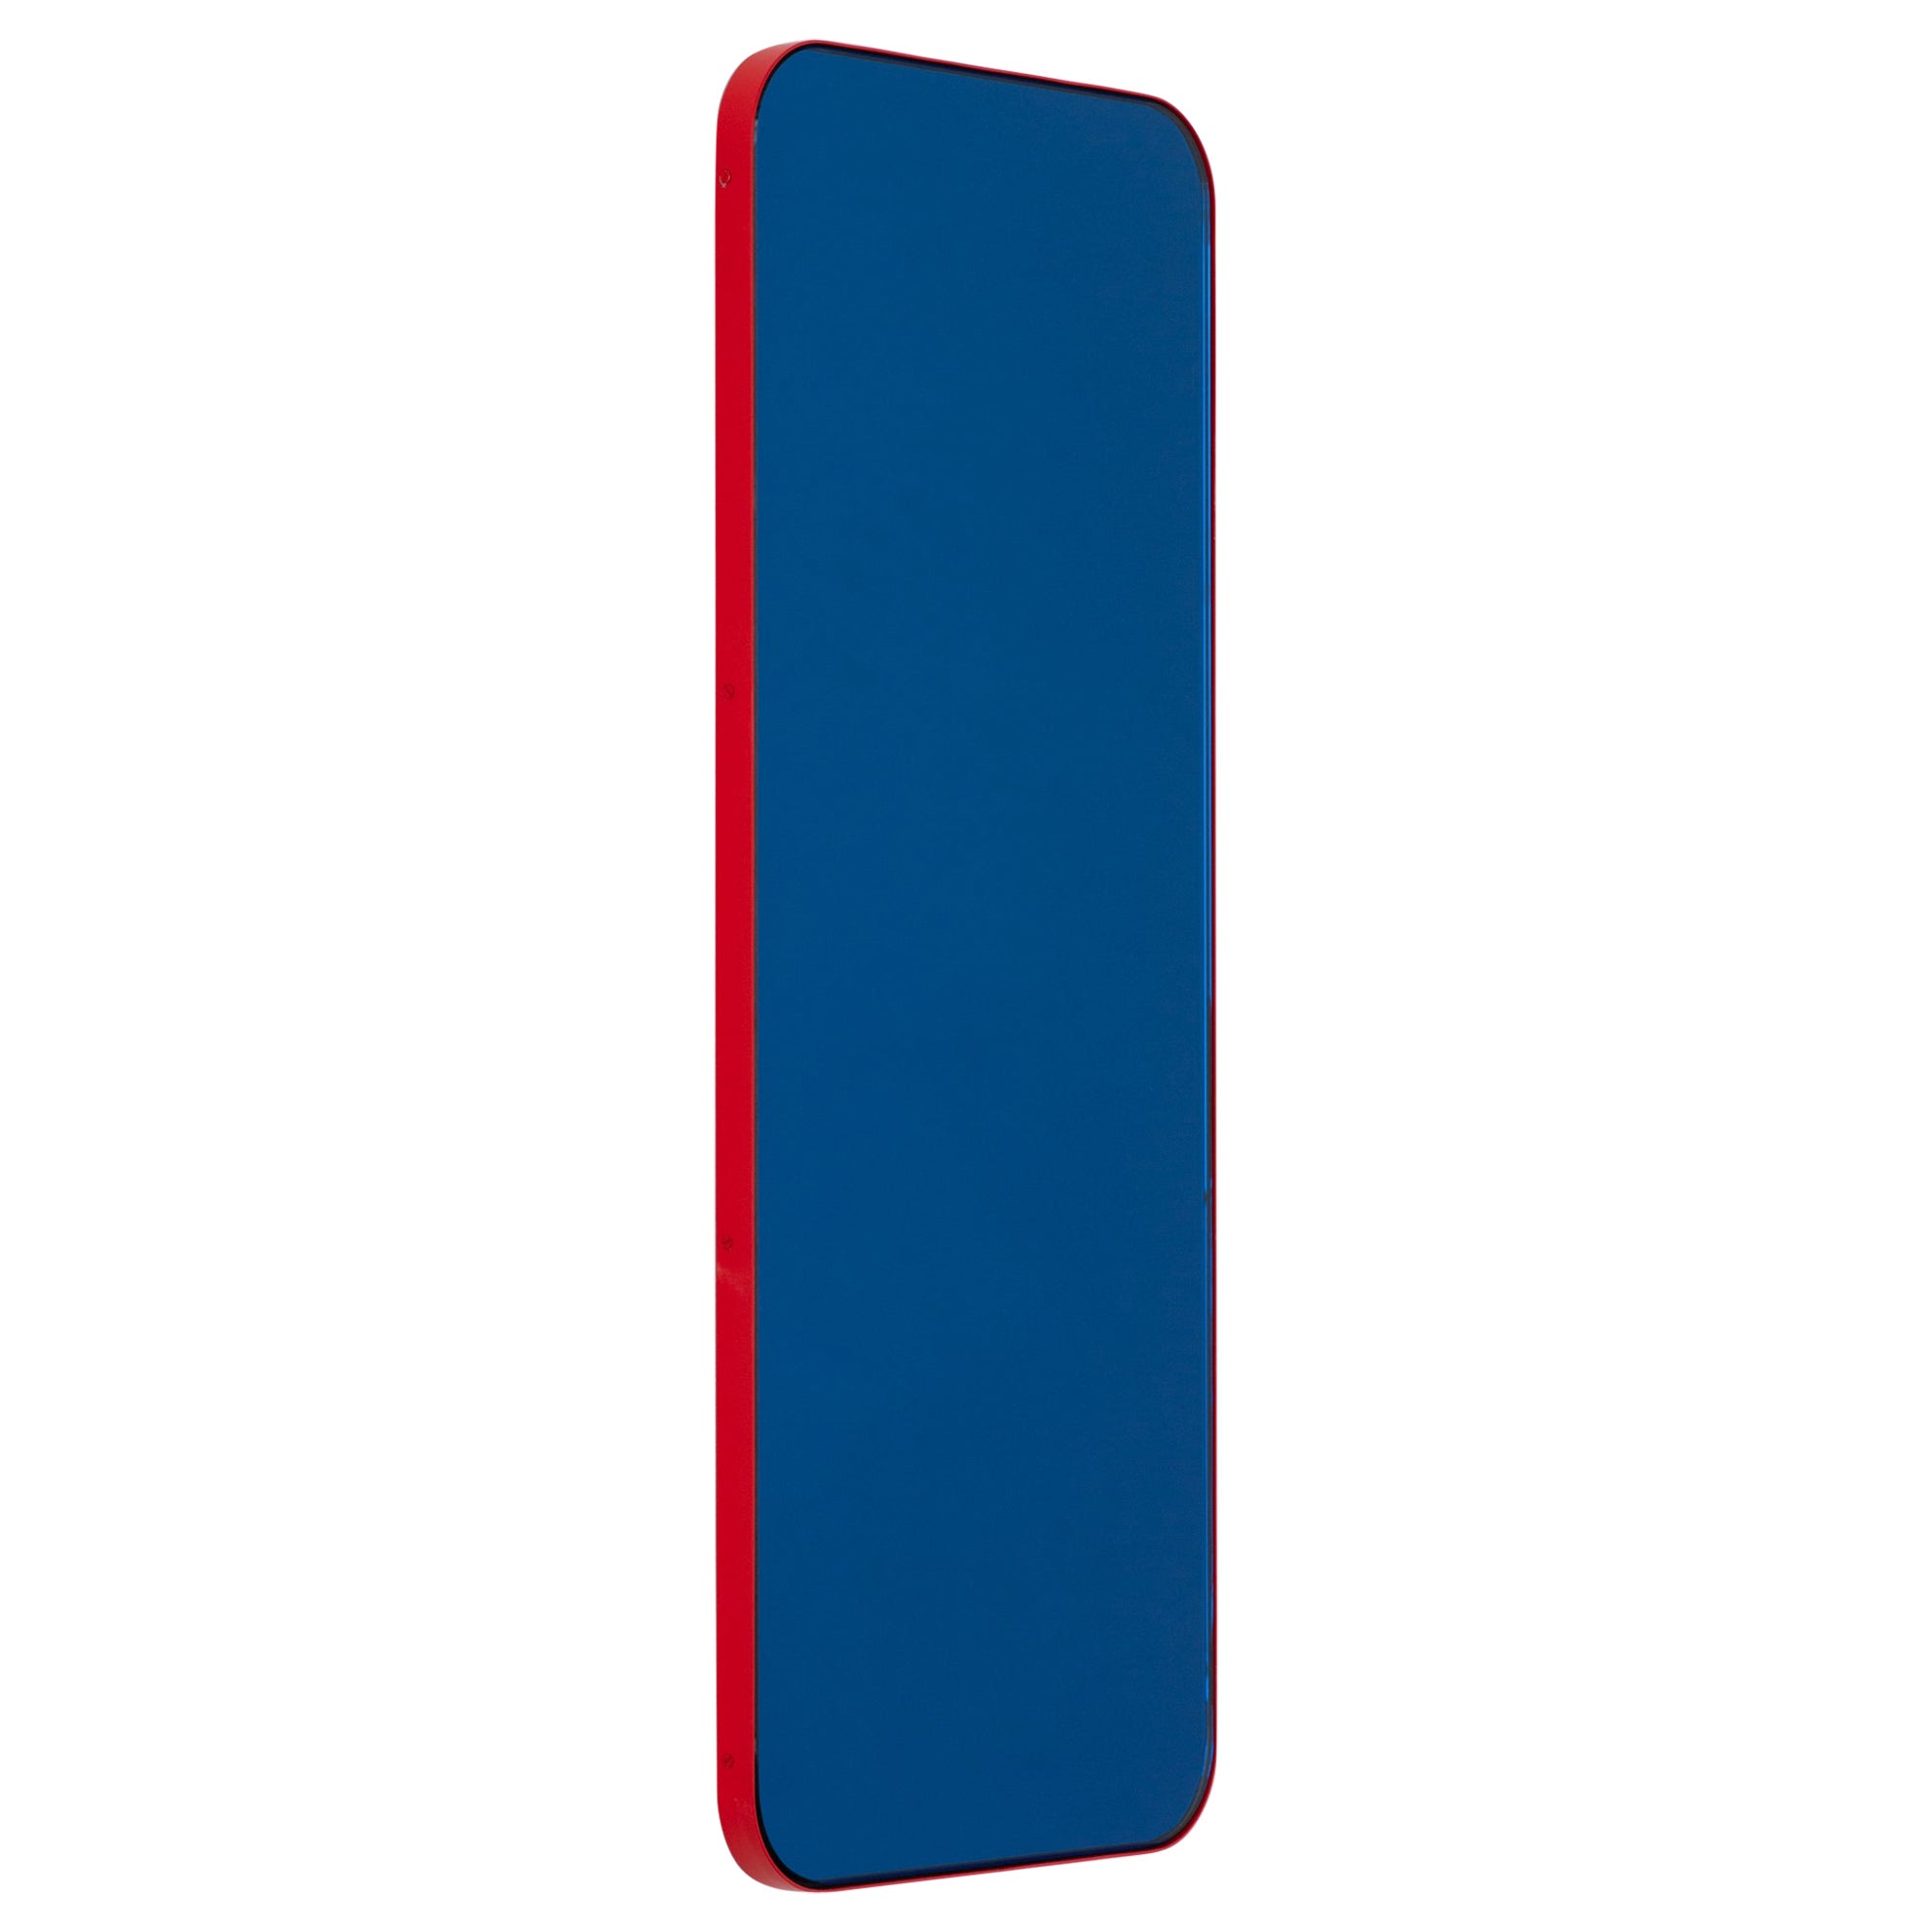 Quadris Rectangular Contemporary Blue Mirror with a Red Frame, Large For Sale